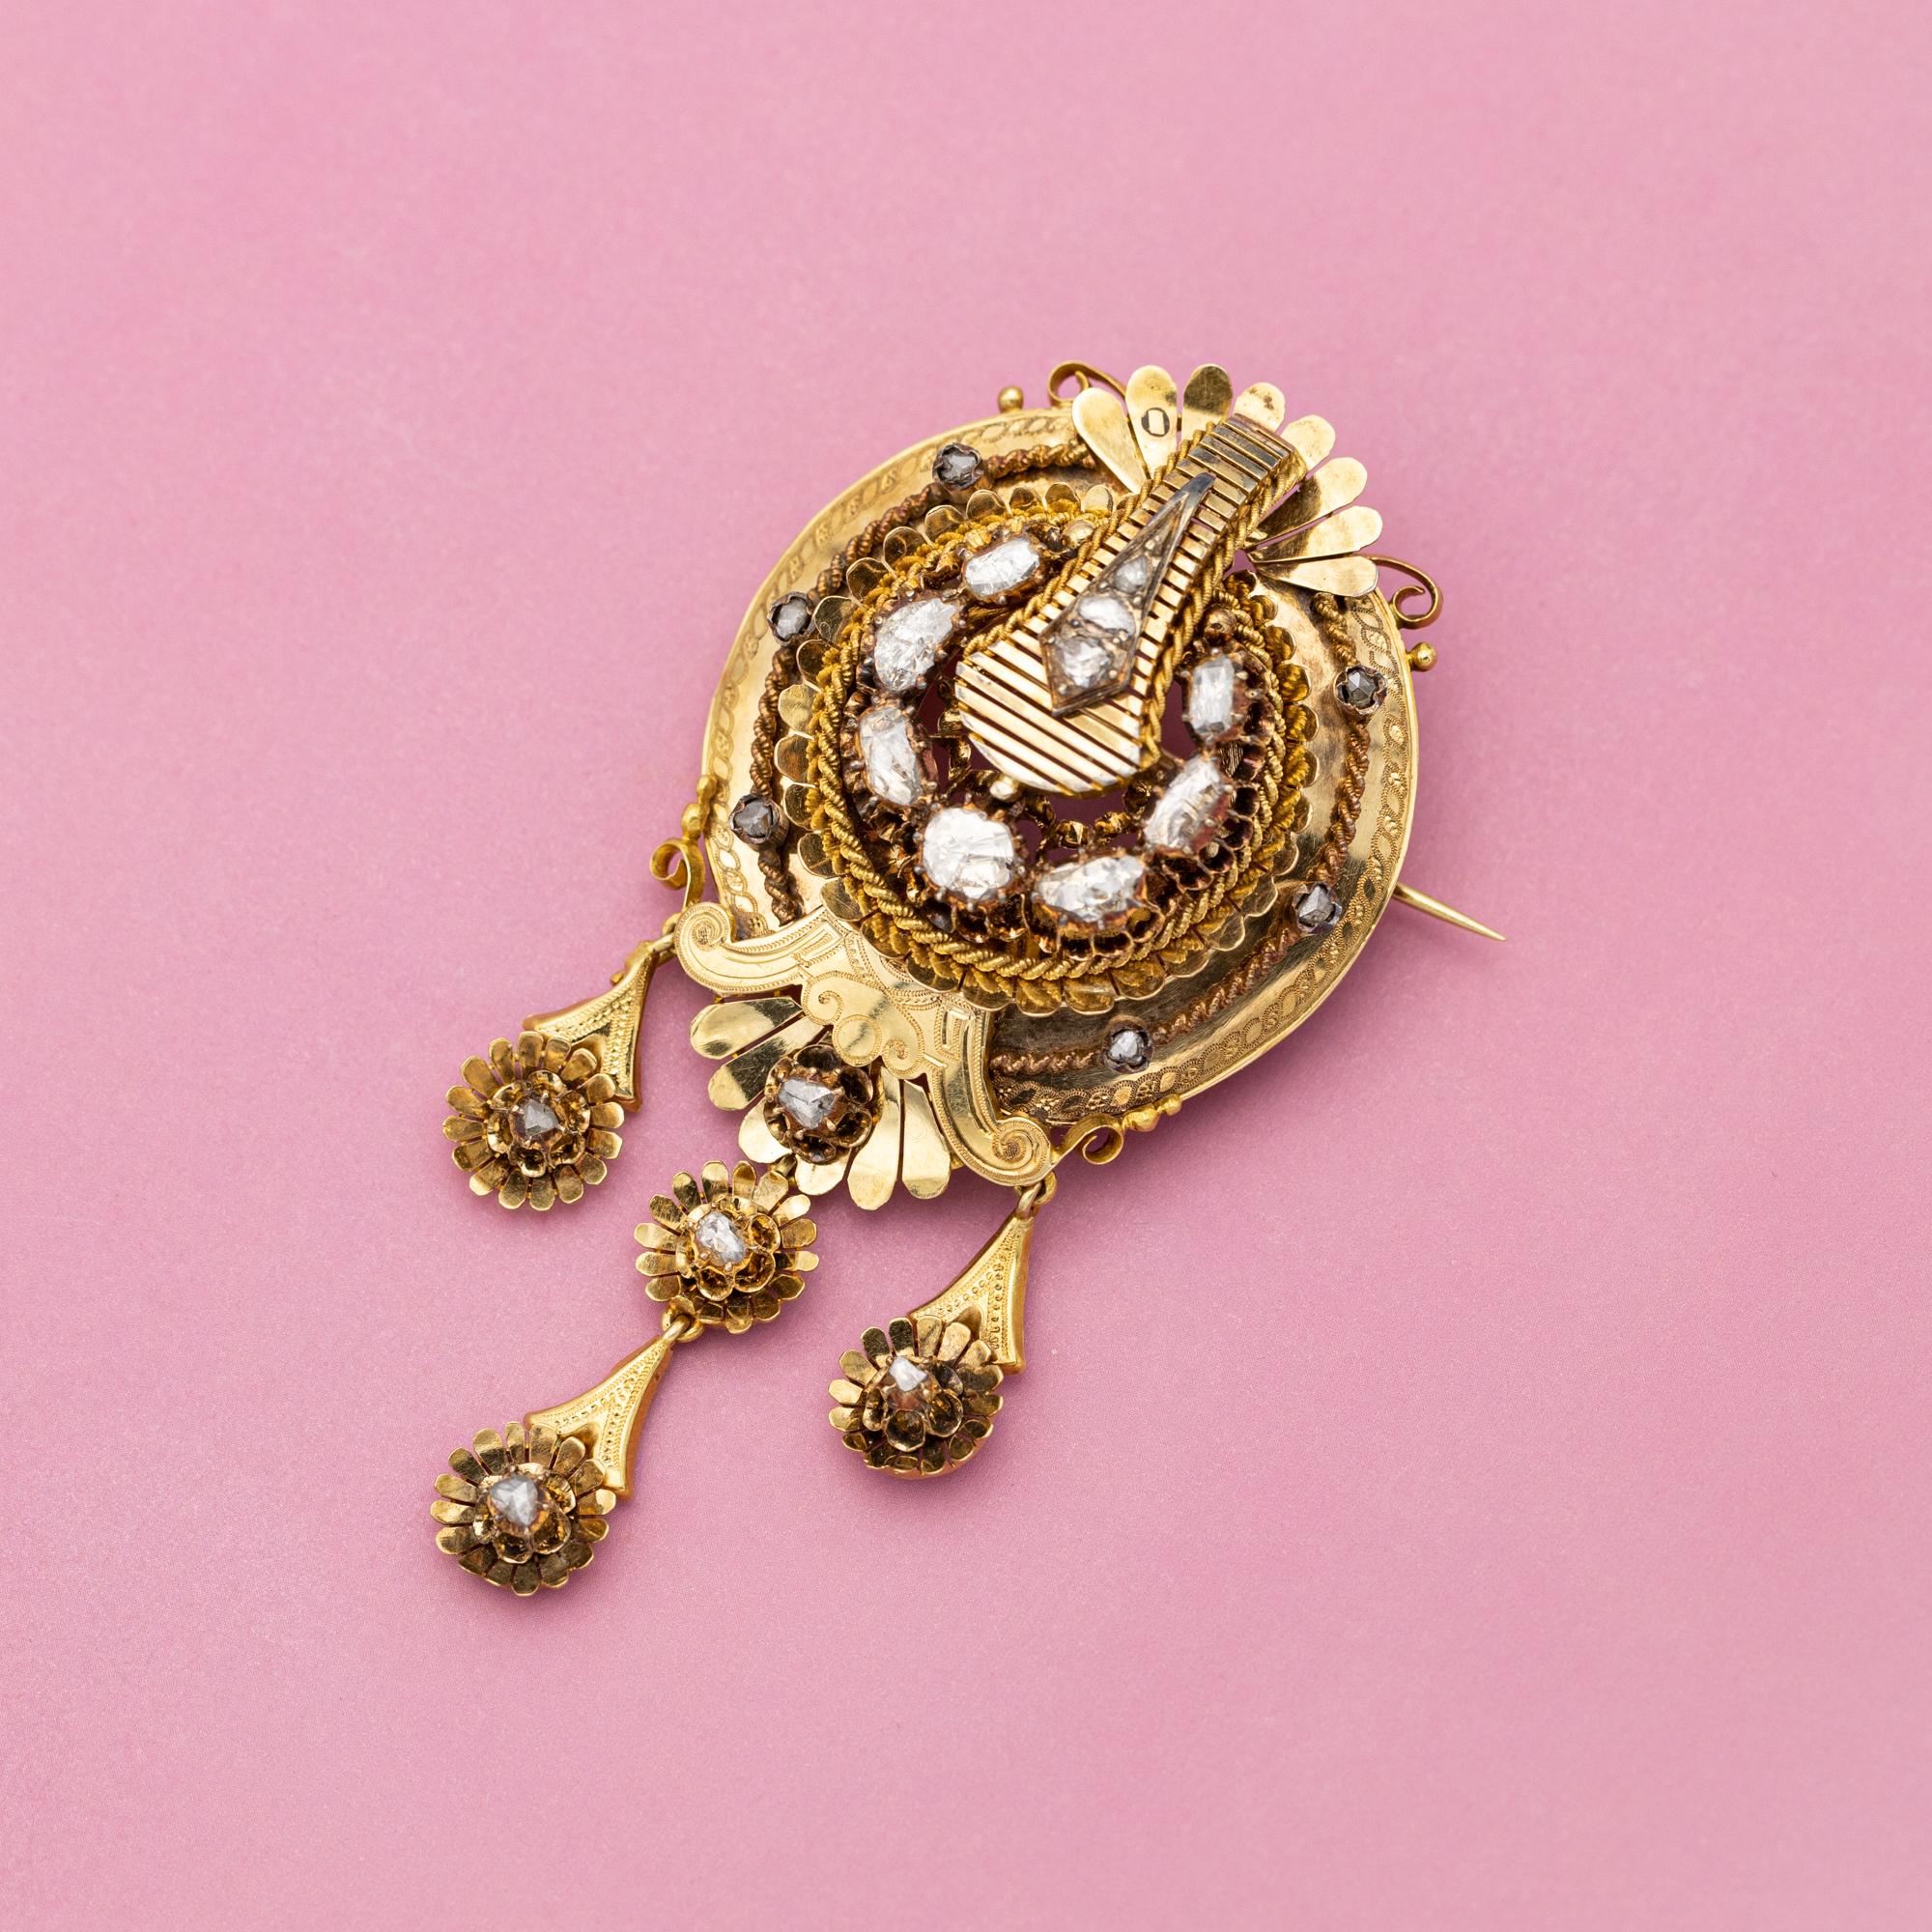 18ct yellow gold Victorian brooch - Large and heavy foiled back diamond heirloom For Sale 5